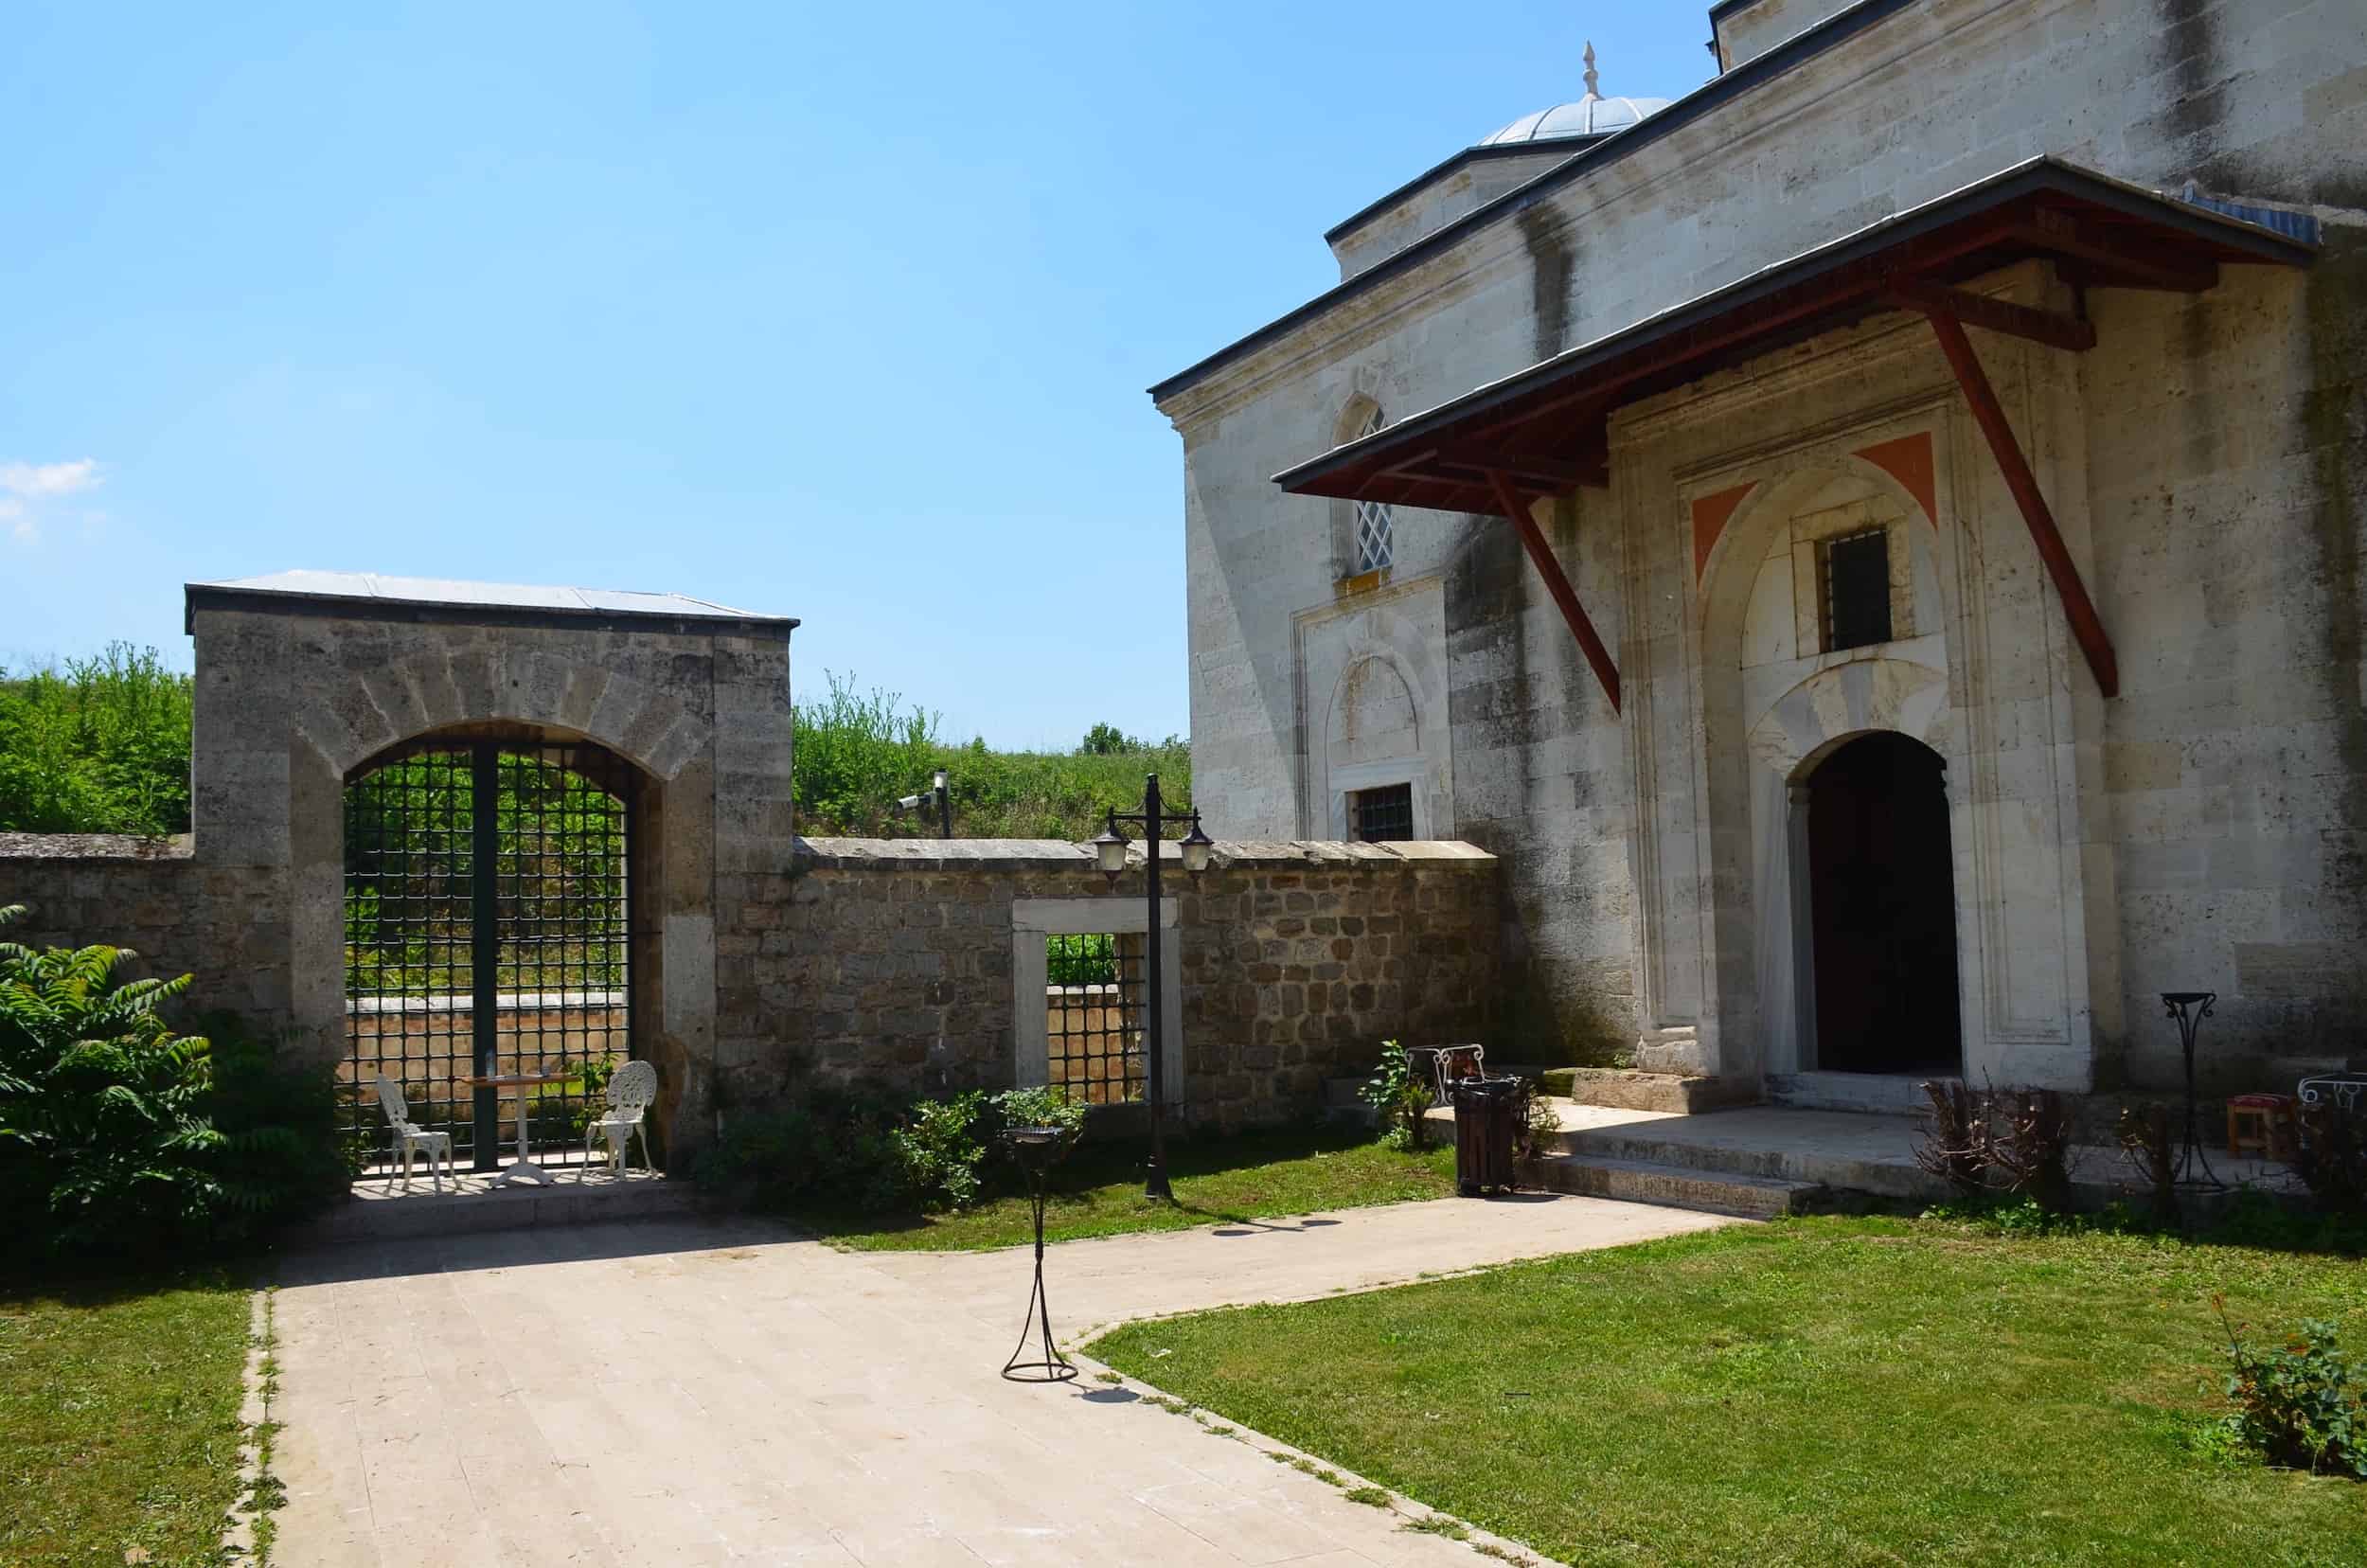 Sultan's Gate (left) and guesthouse (right) at the Bayezid II Mosque Complex in Edirne, Turkey